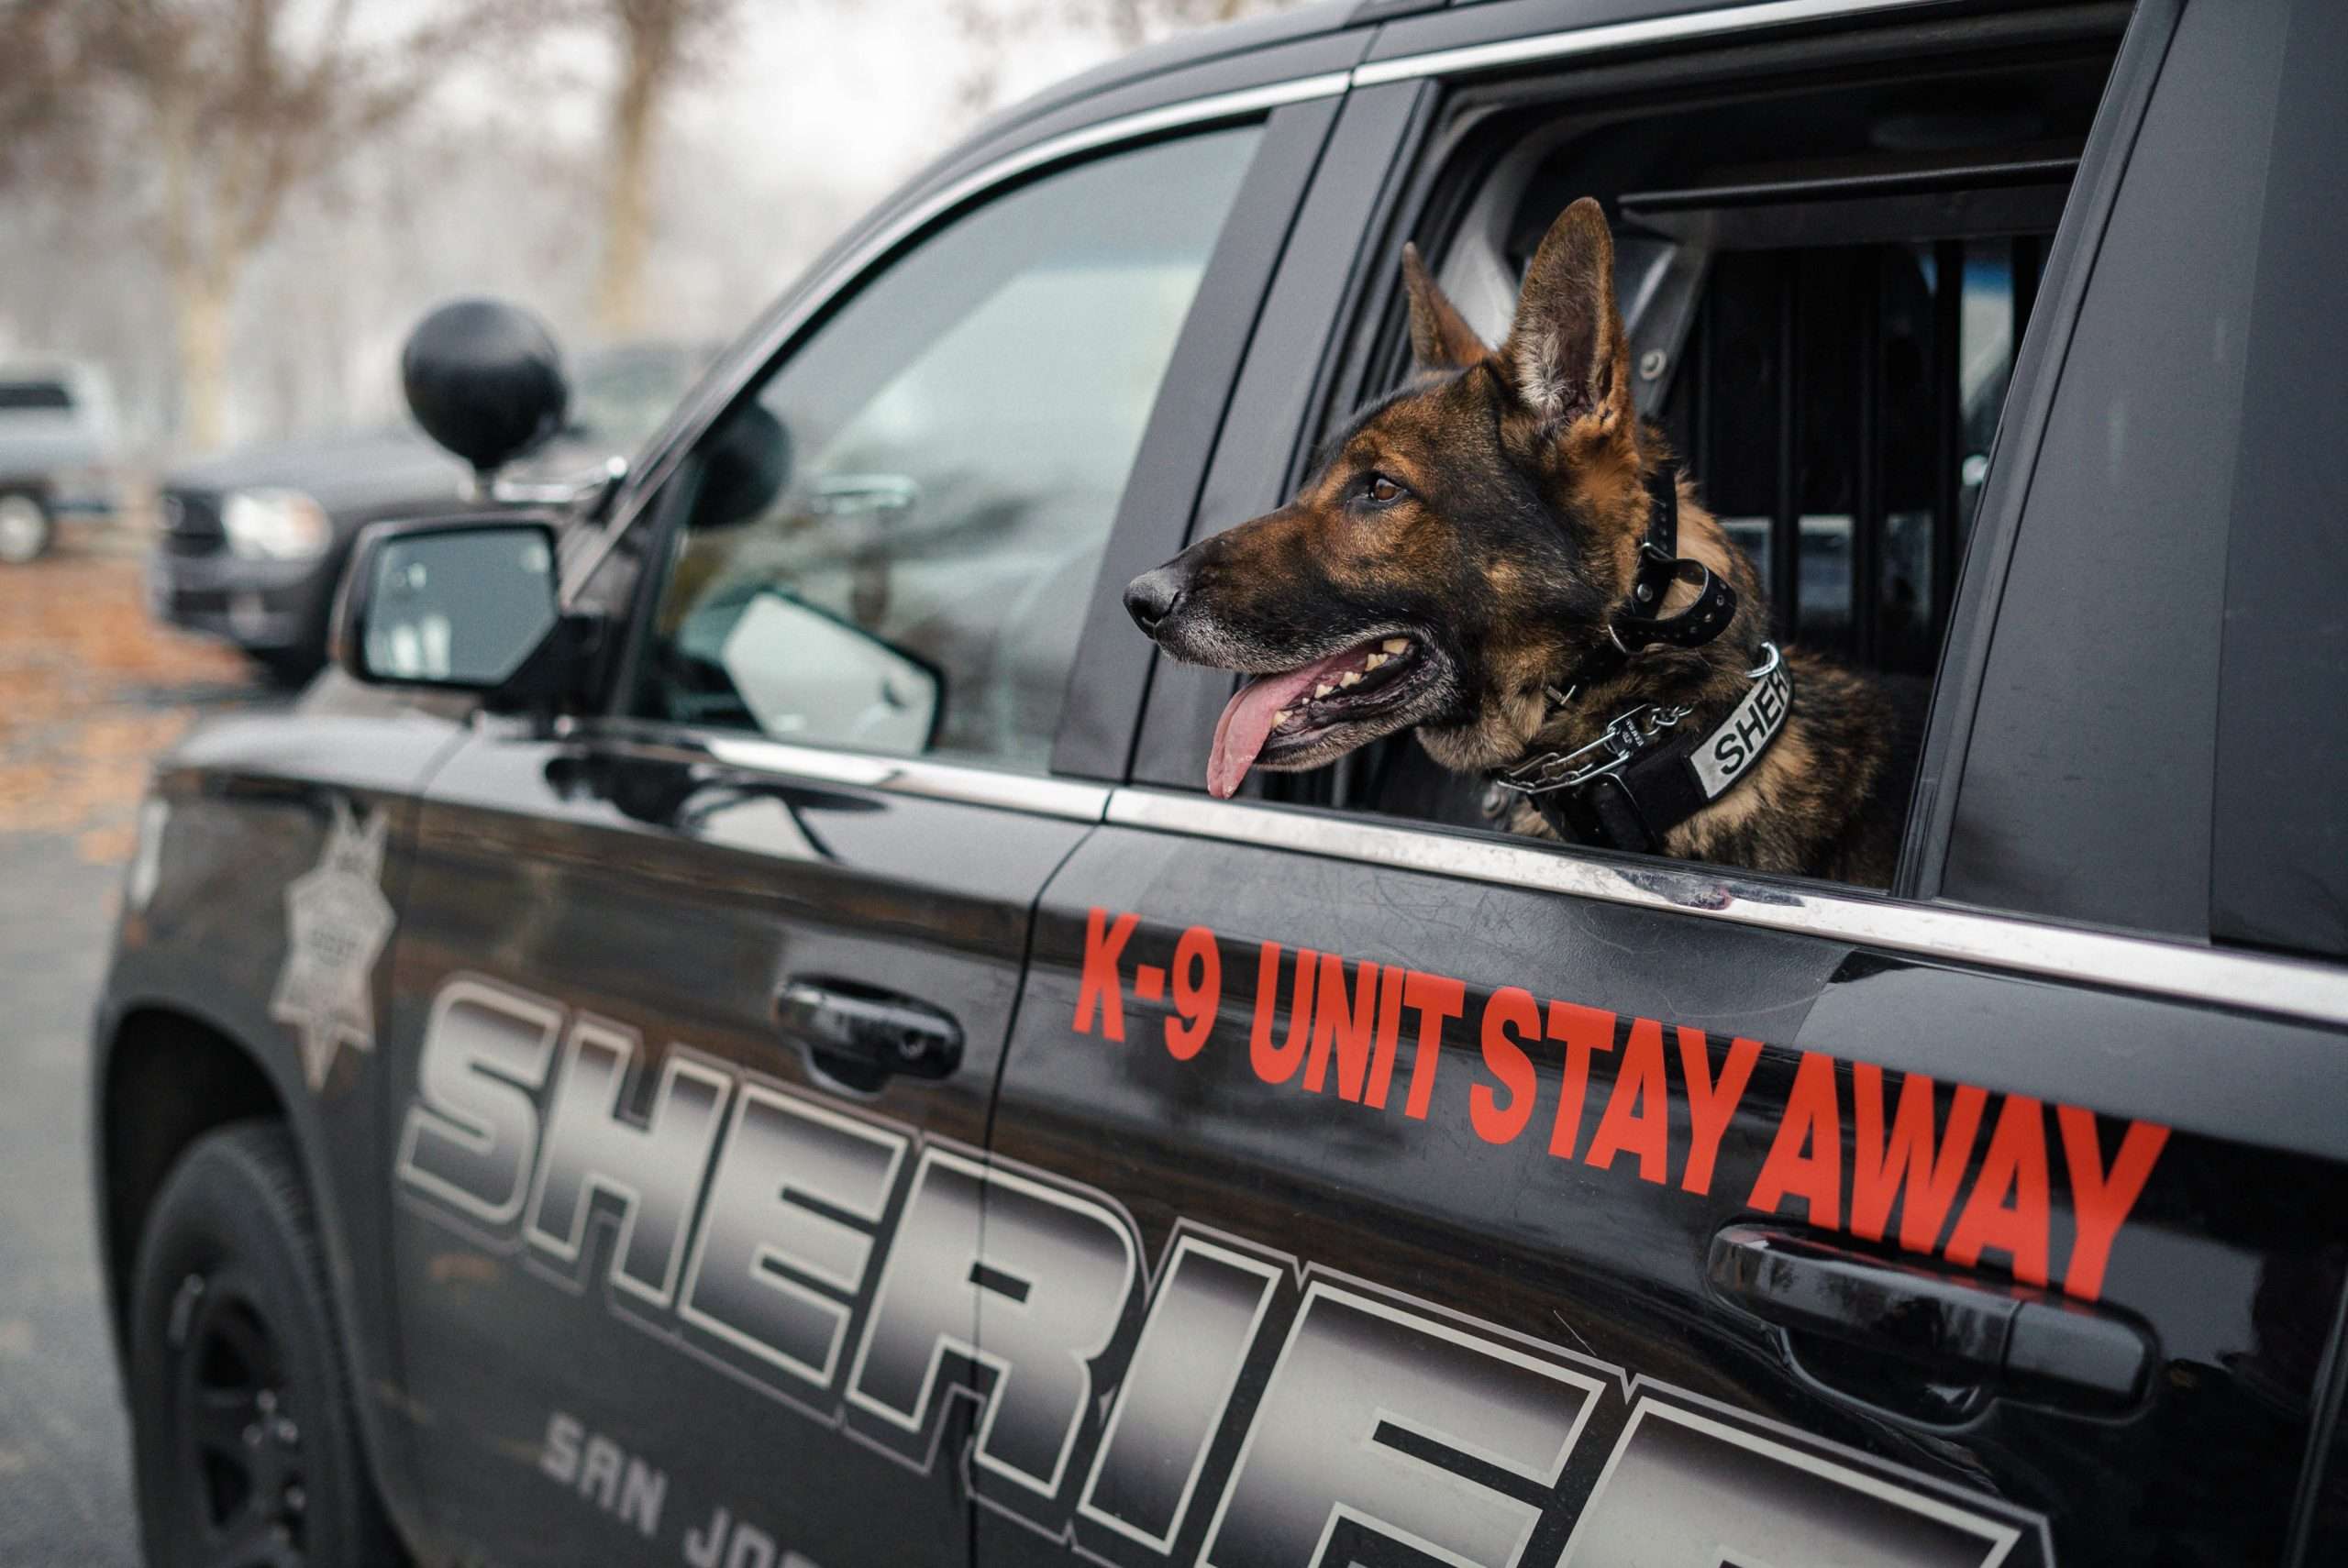 A San Joaquin County Sheriff's K-9 looks out the window of a patrol vehicle